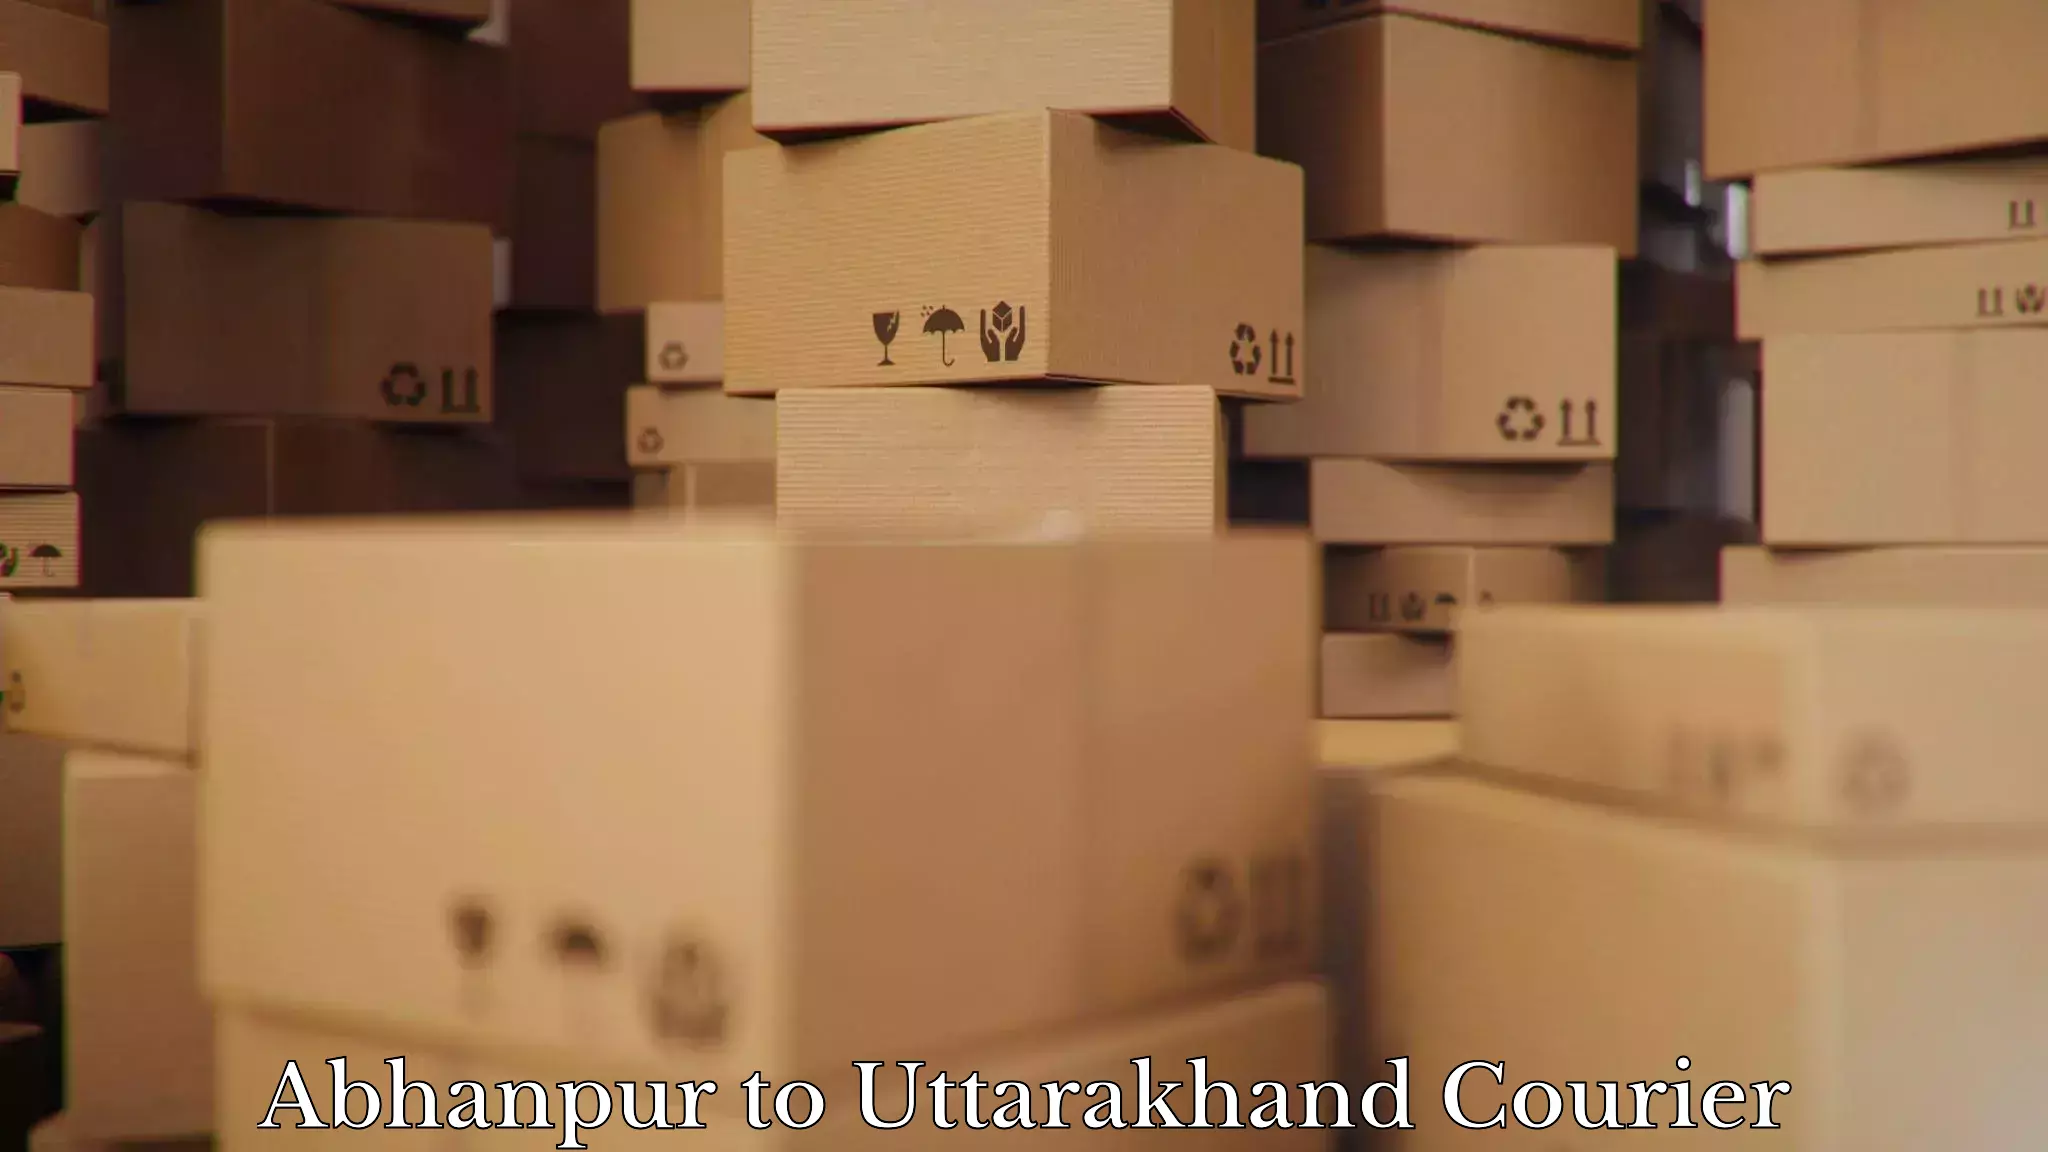 Furniture moving specialists Abhanpur to Uttarakhand